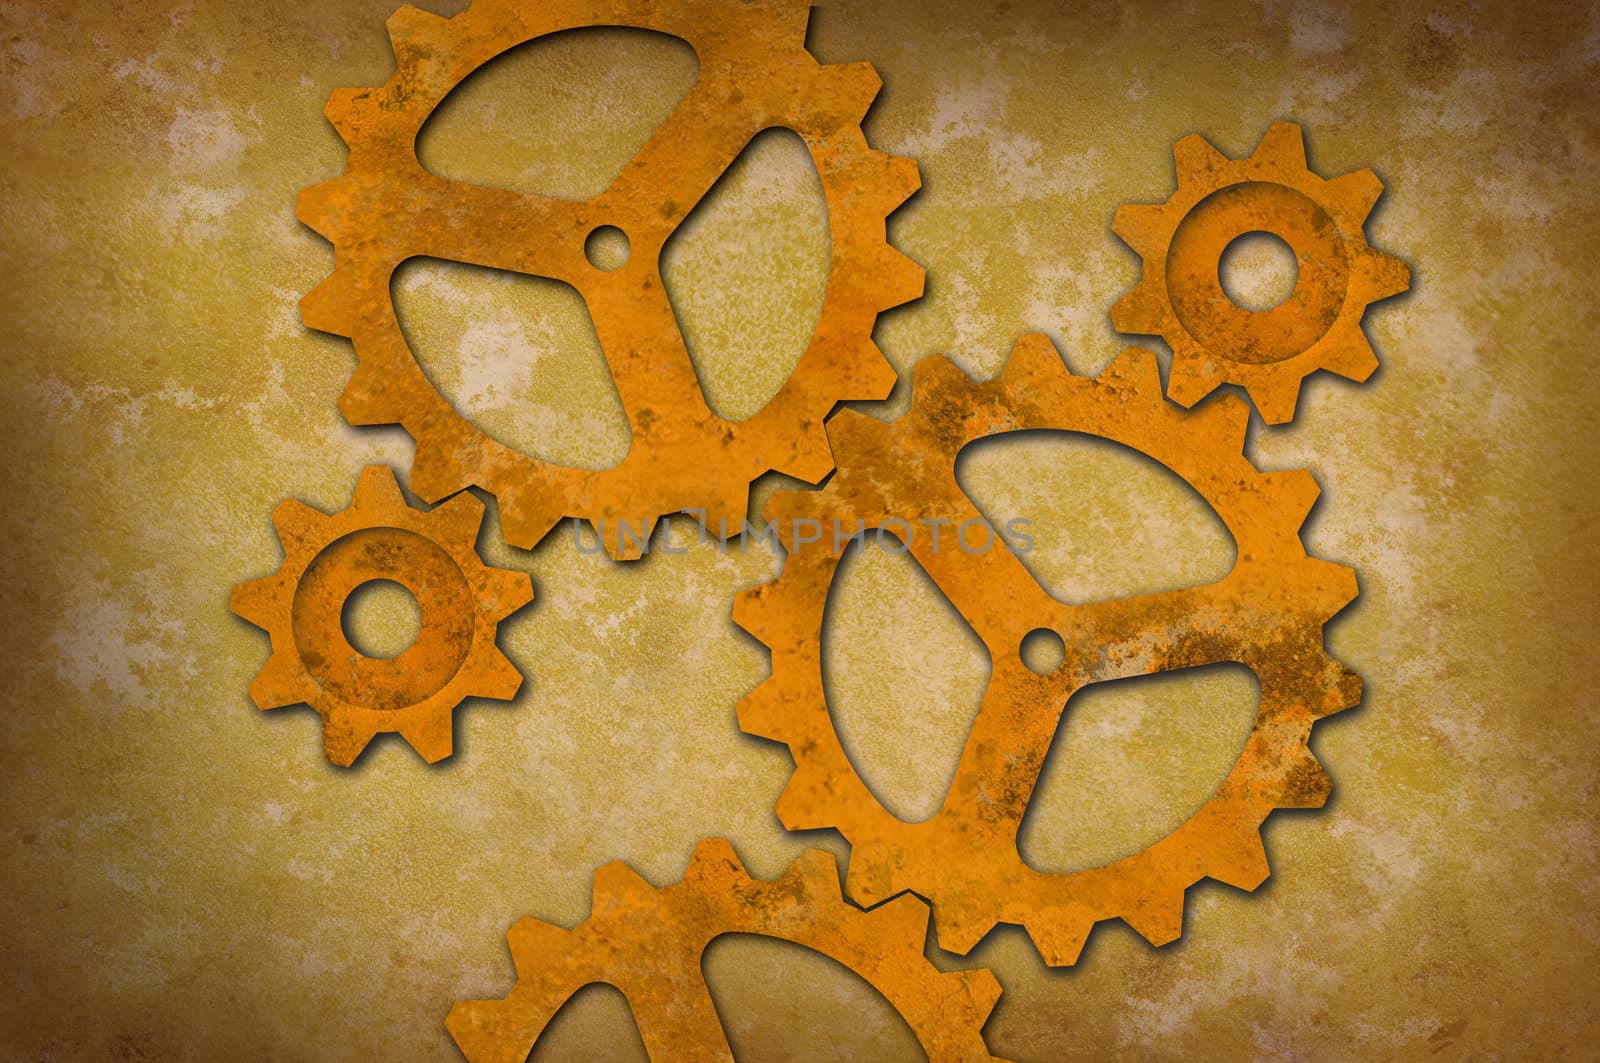 Rusty gears against a mottled yellowish background by Balefire9